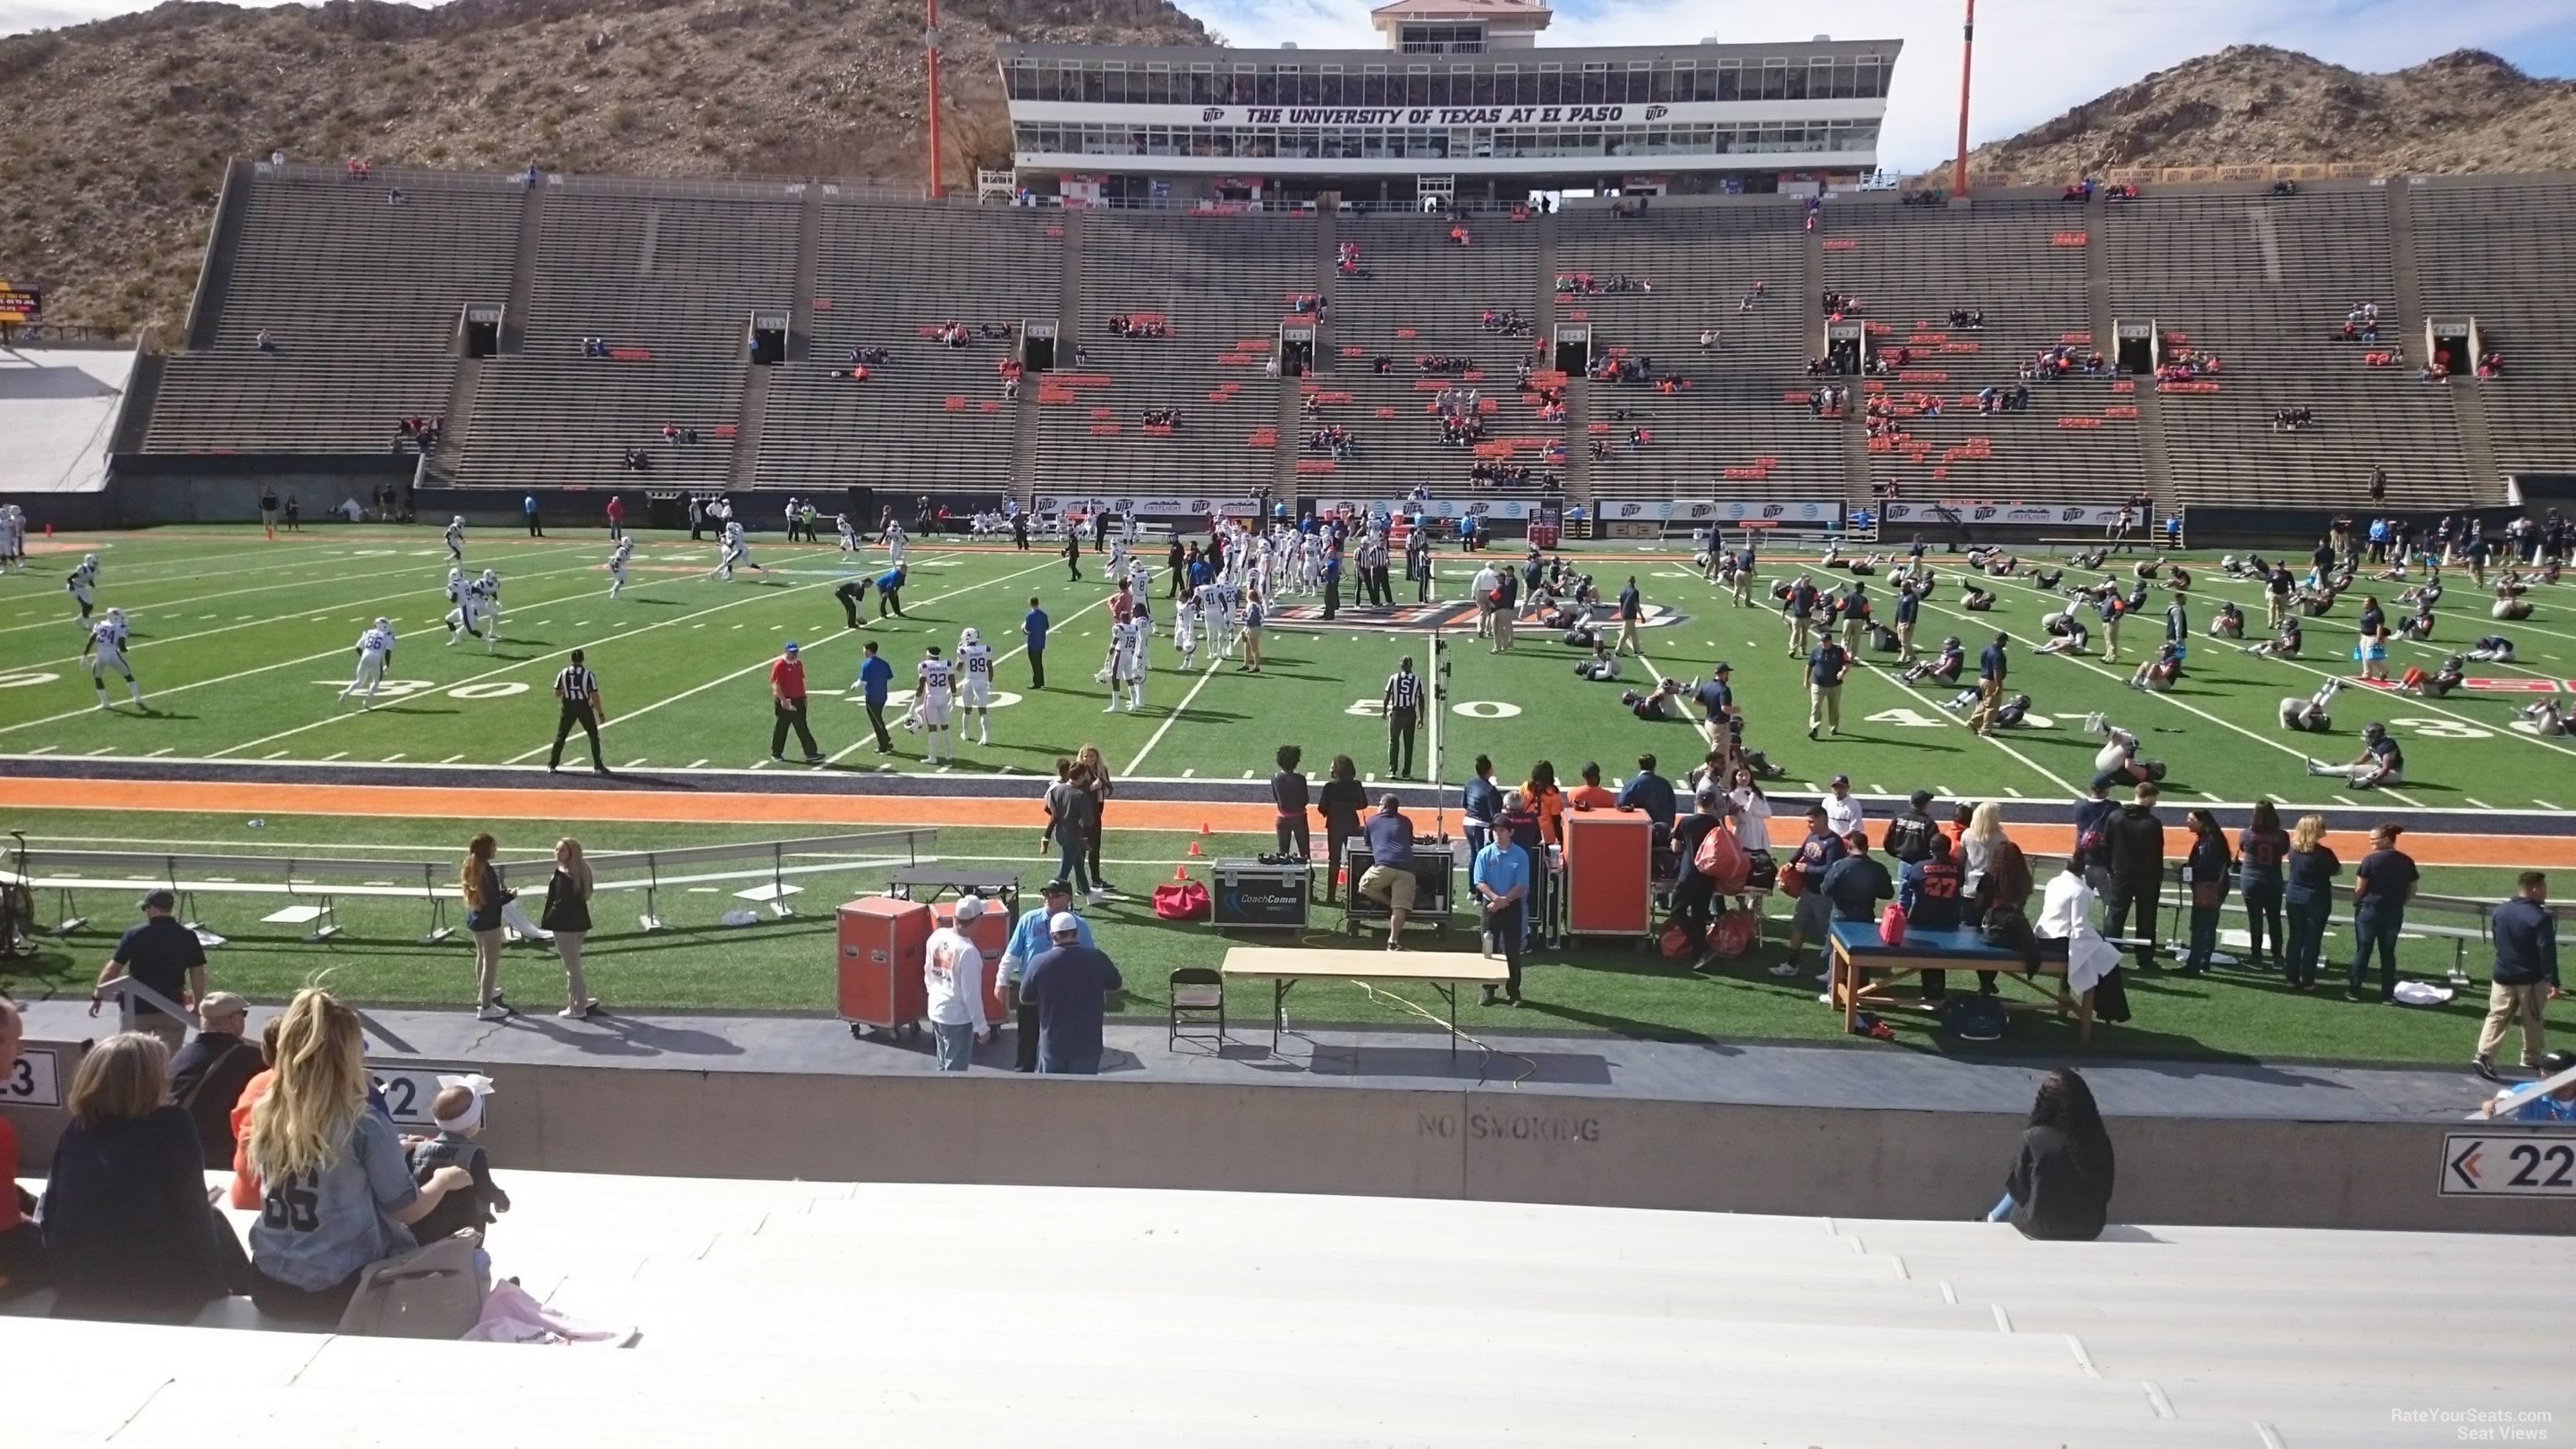 section 22, row 15 seat view  for football - sun bowl